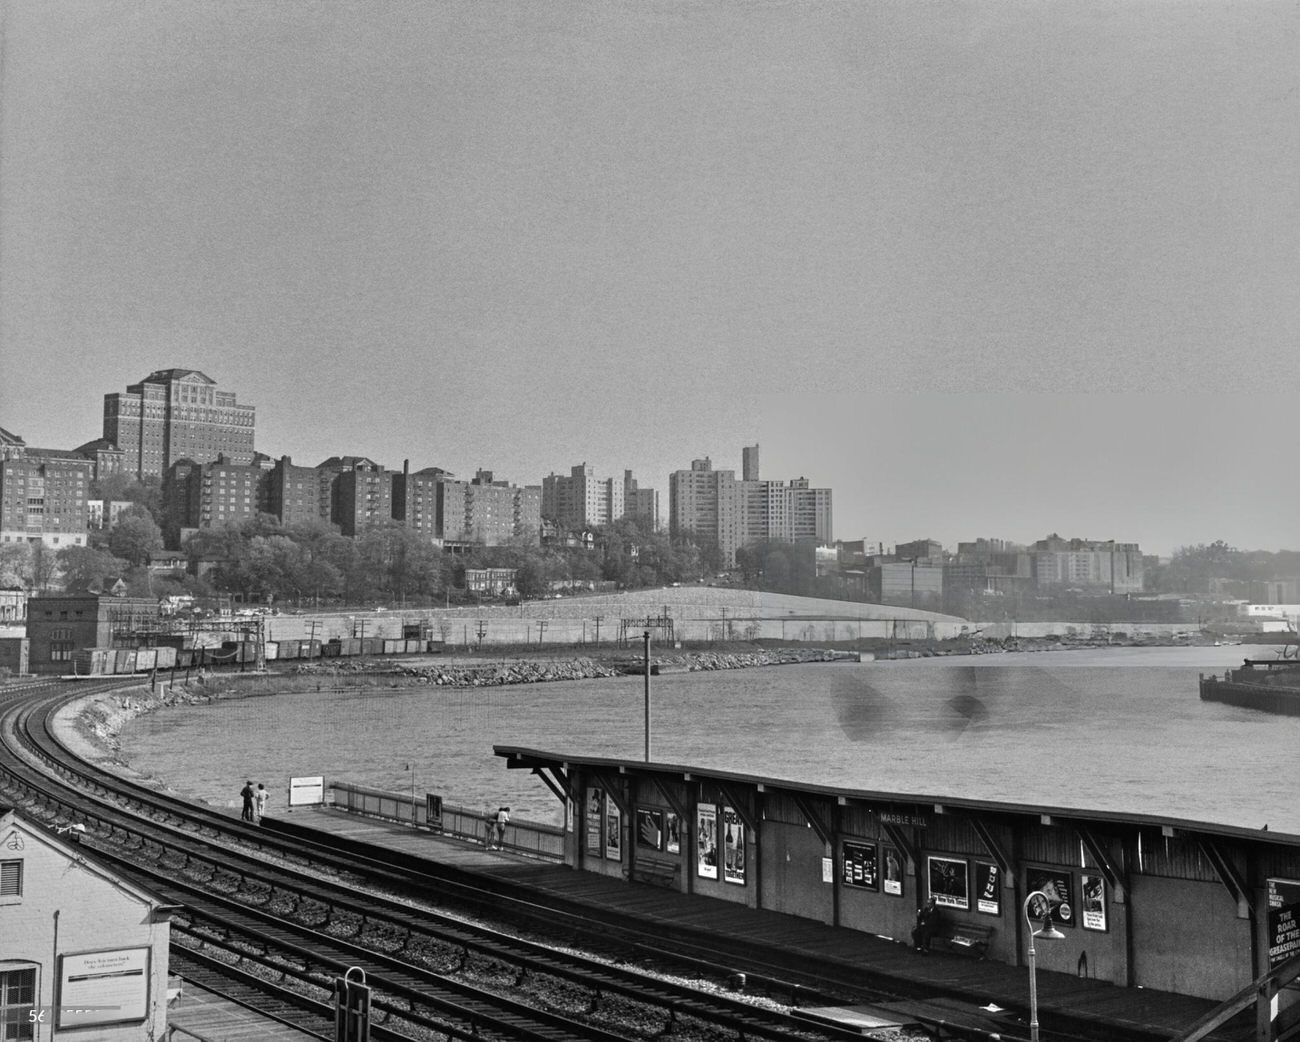 The Bronx Veterans Hospital And Fordham Hill Apartments Overlook The Harlem River With Marble Hill Station In The Foreground In The Bronx, 1965.